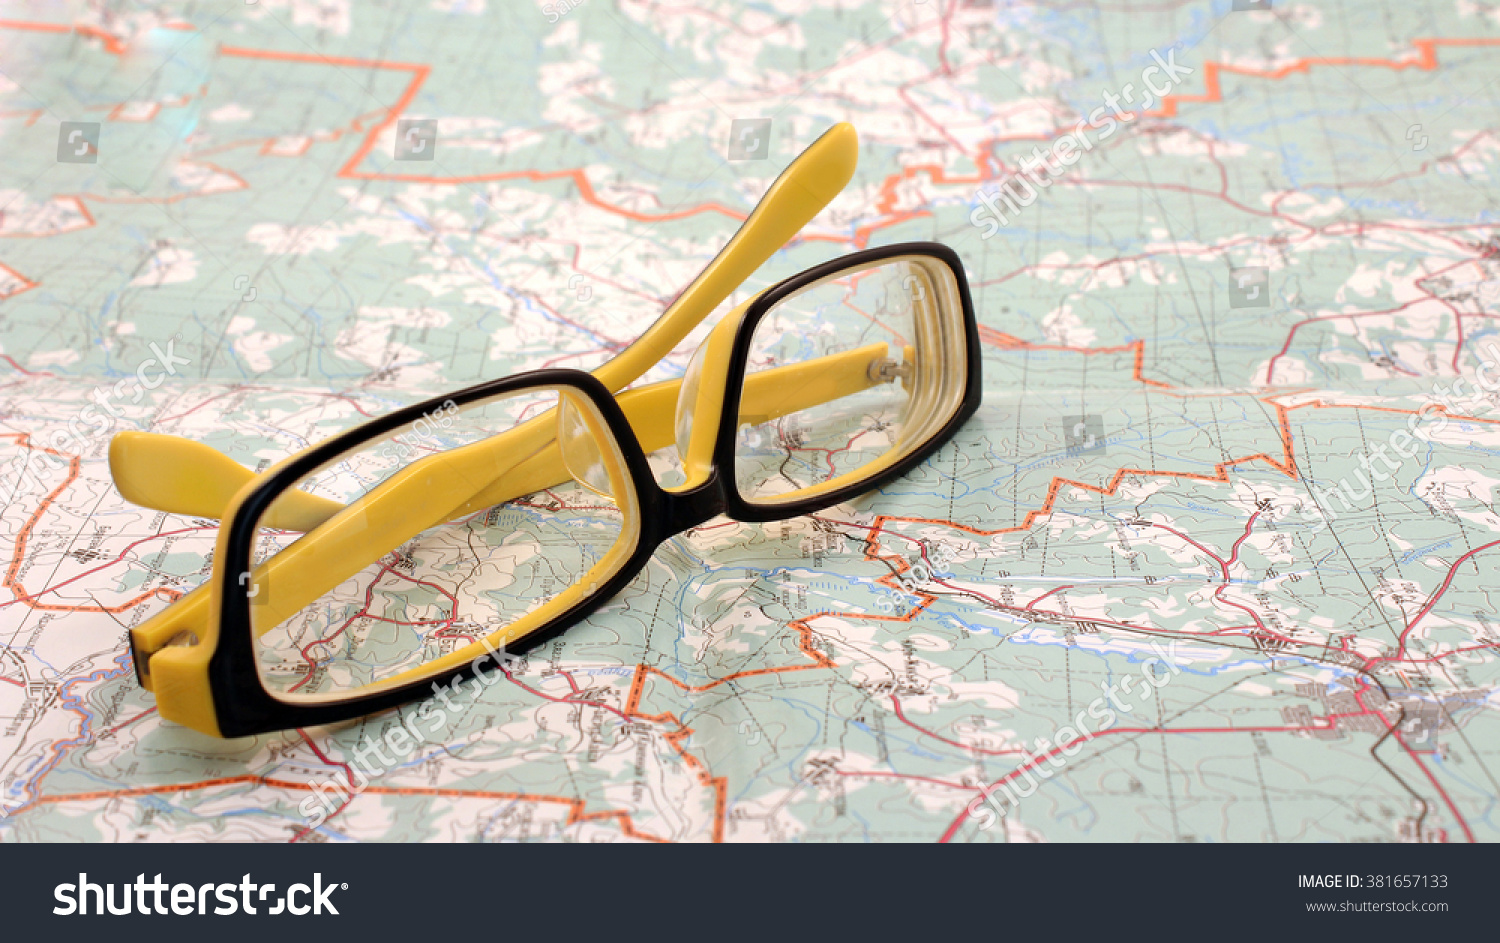 Stock Photo Eyeglasses And Map 381657133 